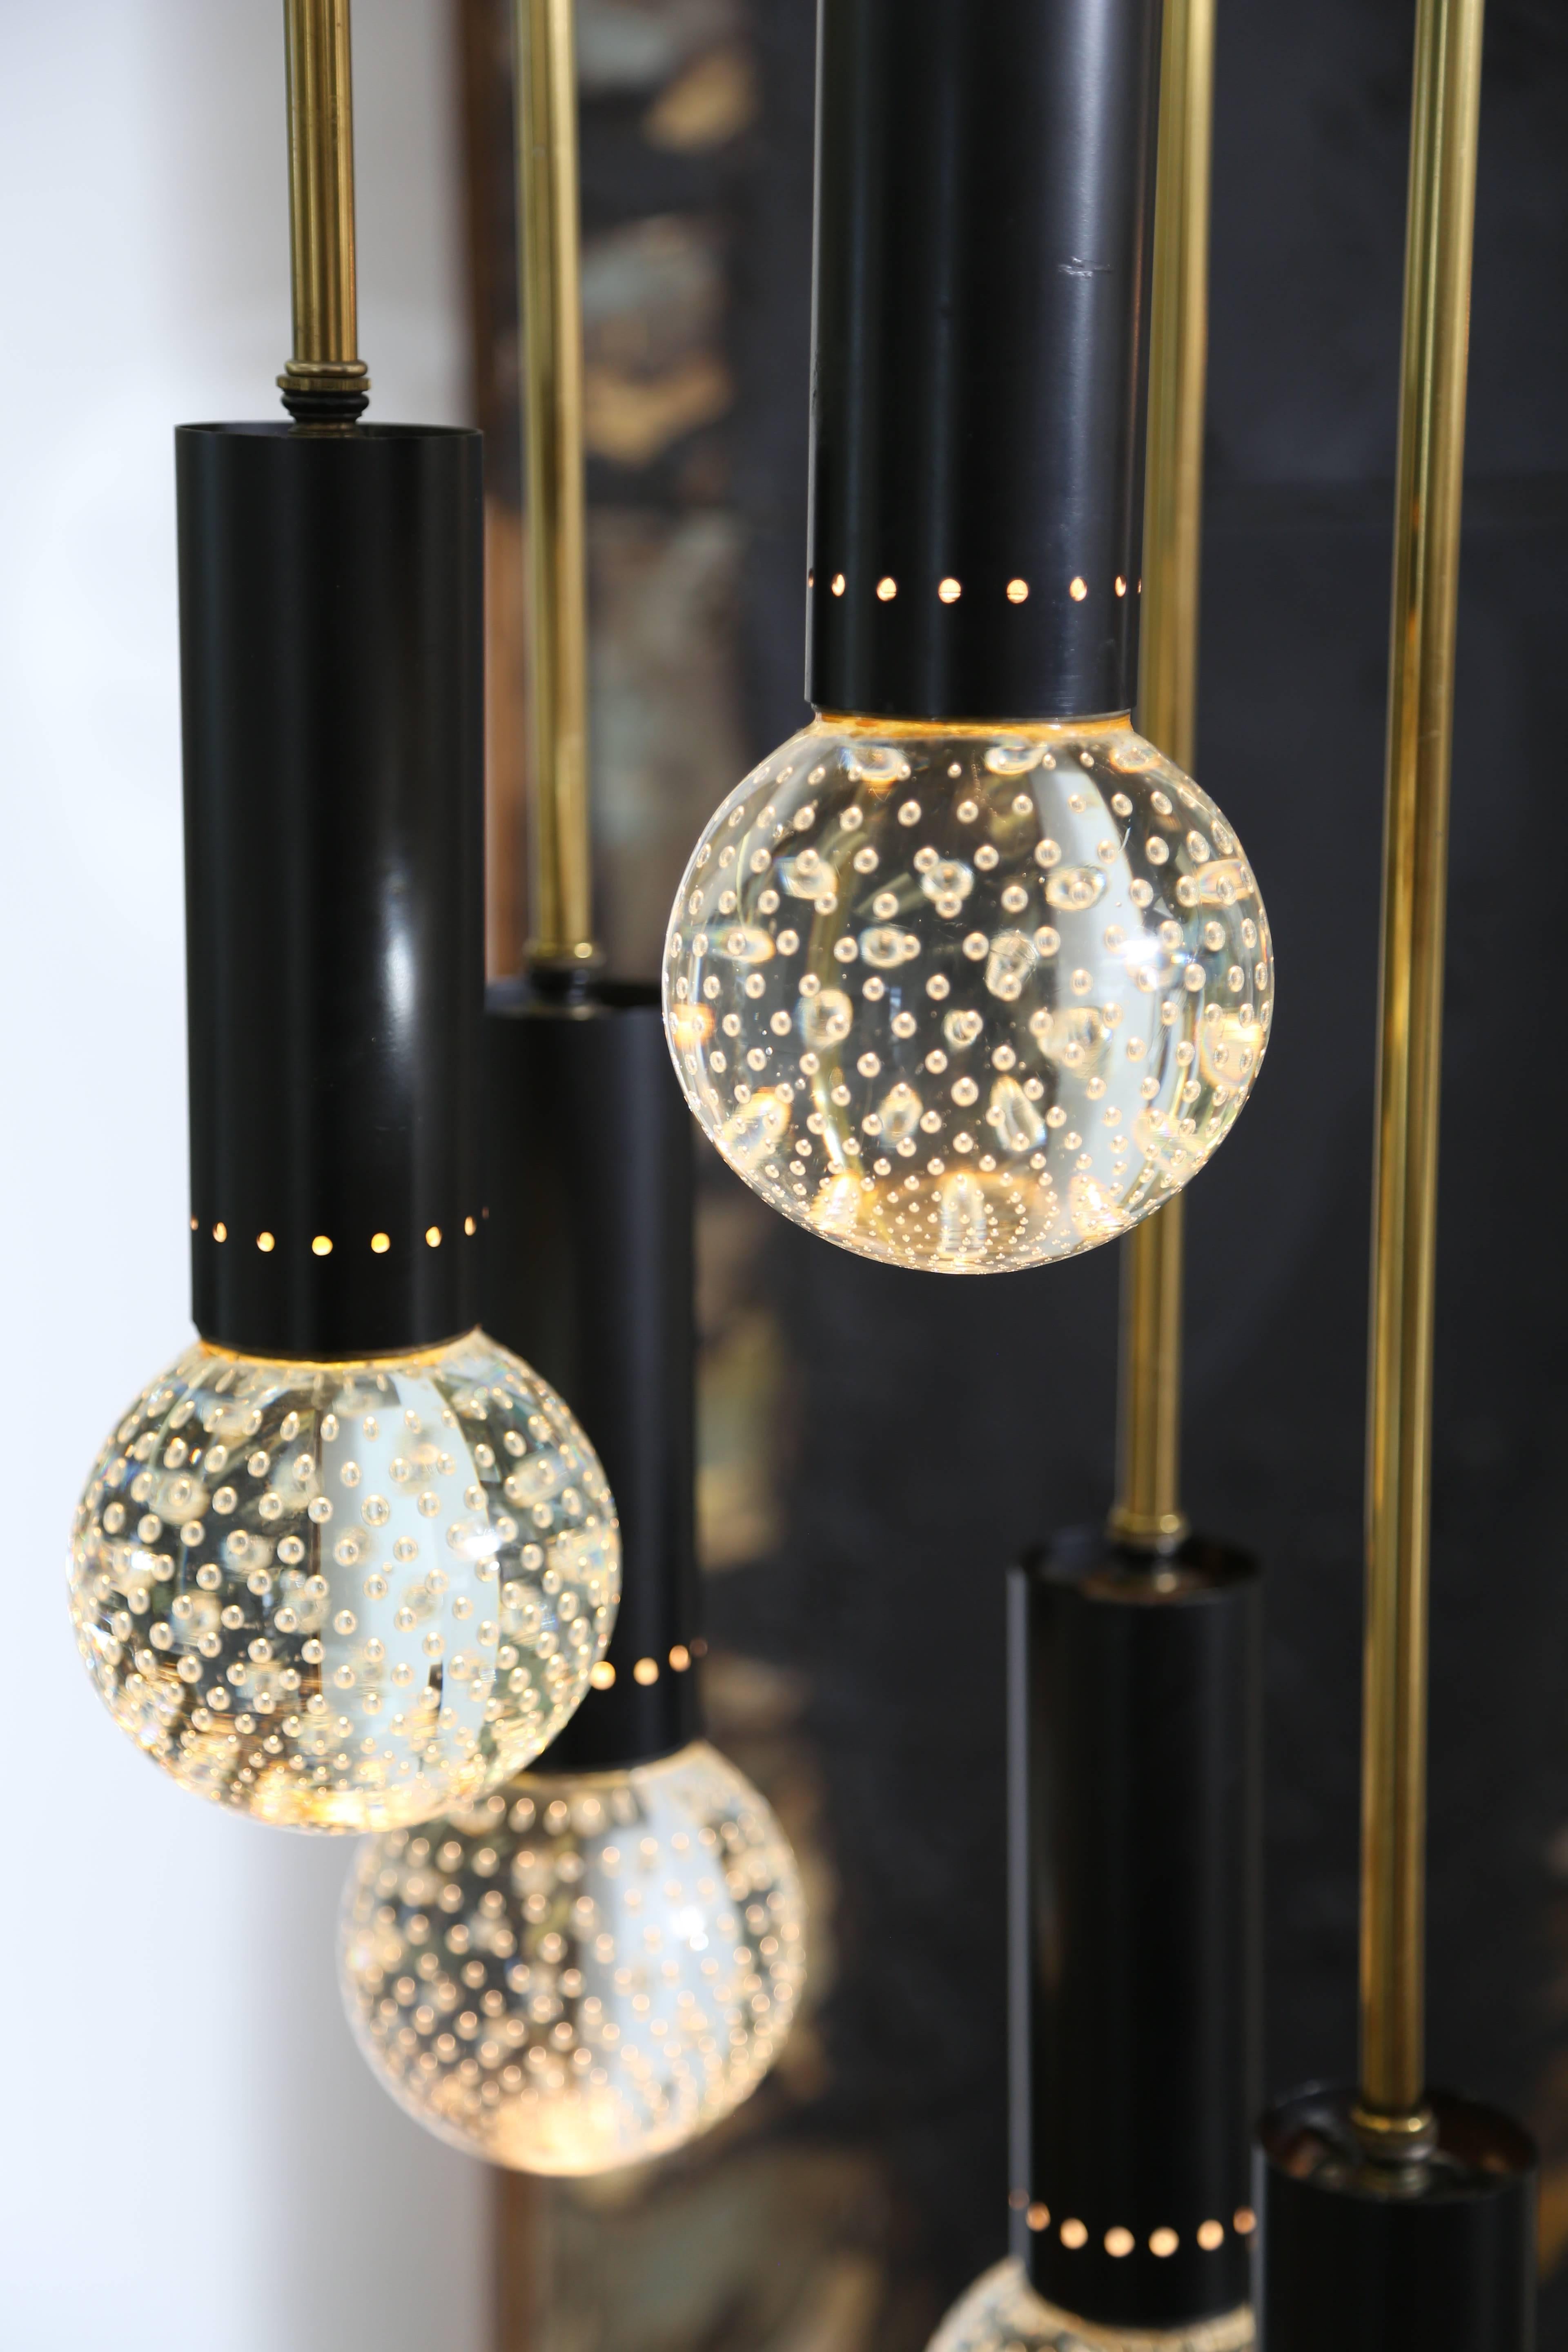 Bulicante Glass Orbs created by Seguso in Murano.
The fixture was manufactured by Lightolier.
It was not unusual for Lightolier to combine Italian and American design in the 1950s.
If you are looking for a shorter hanging fixture, these rods